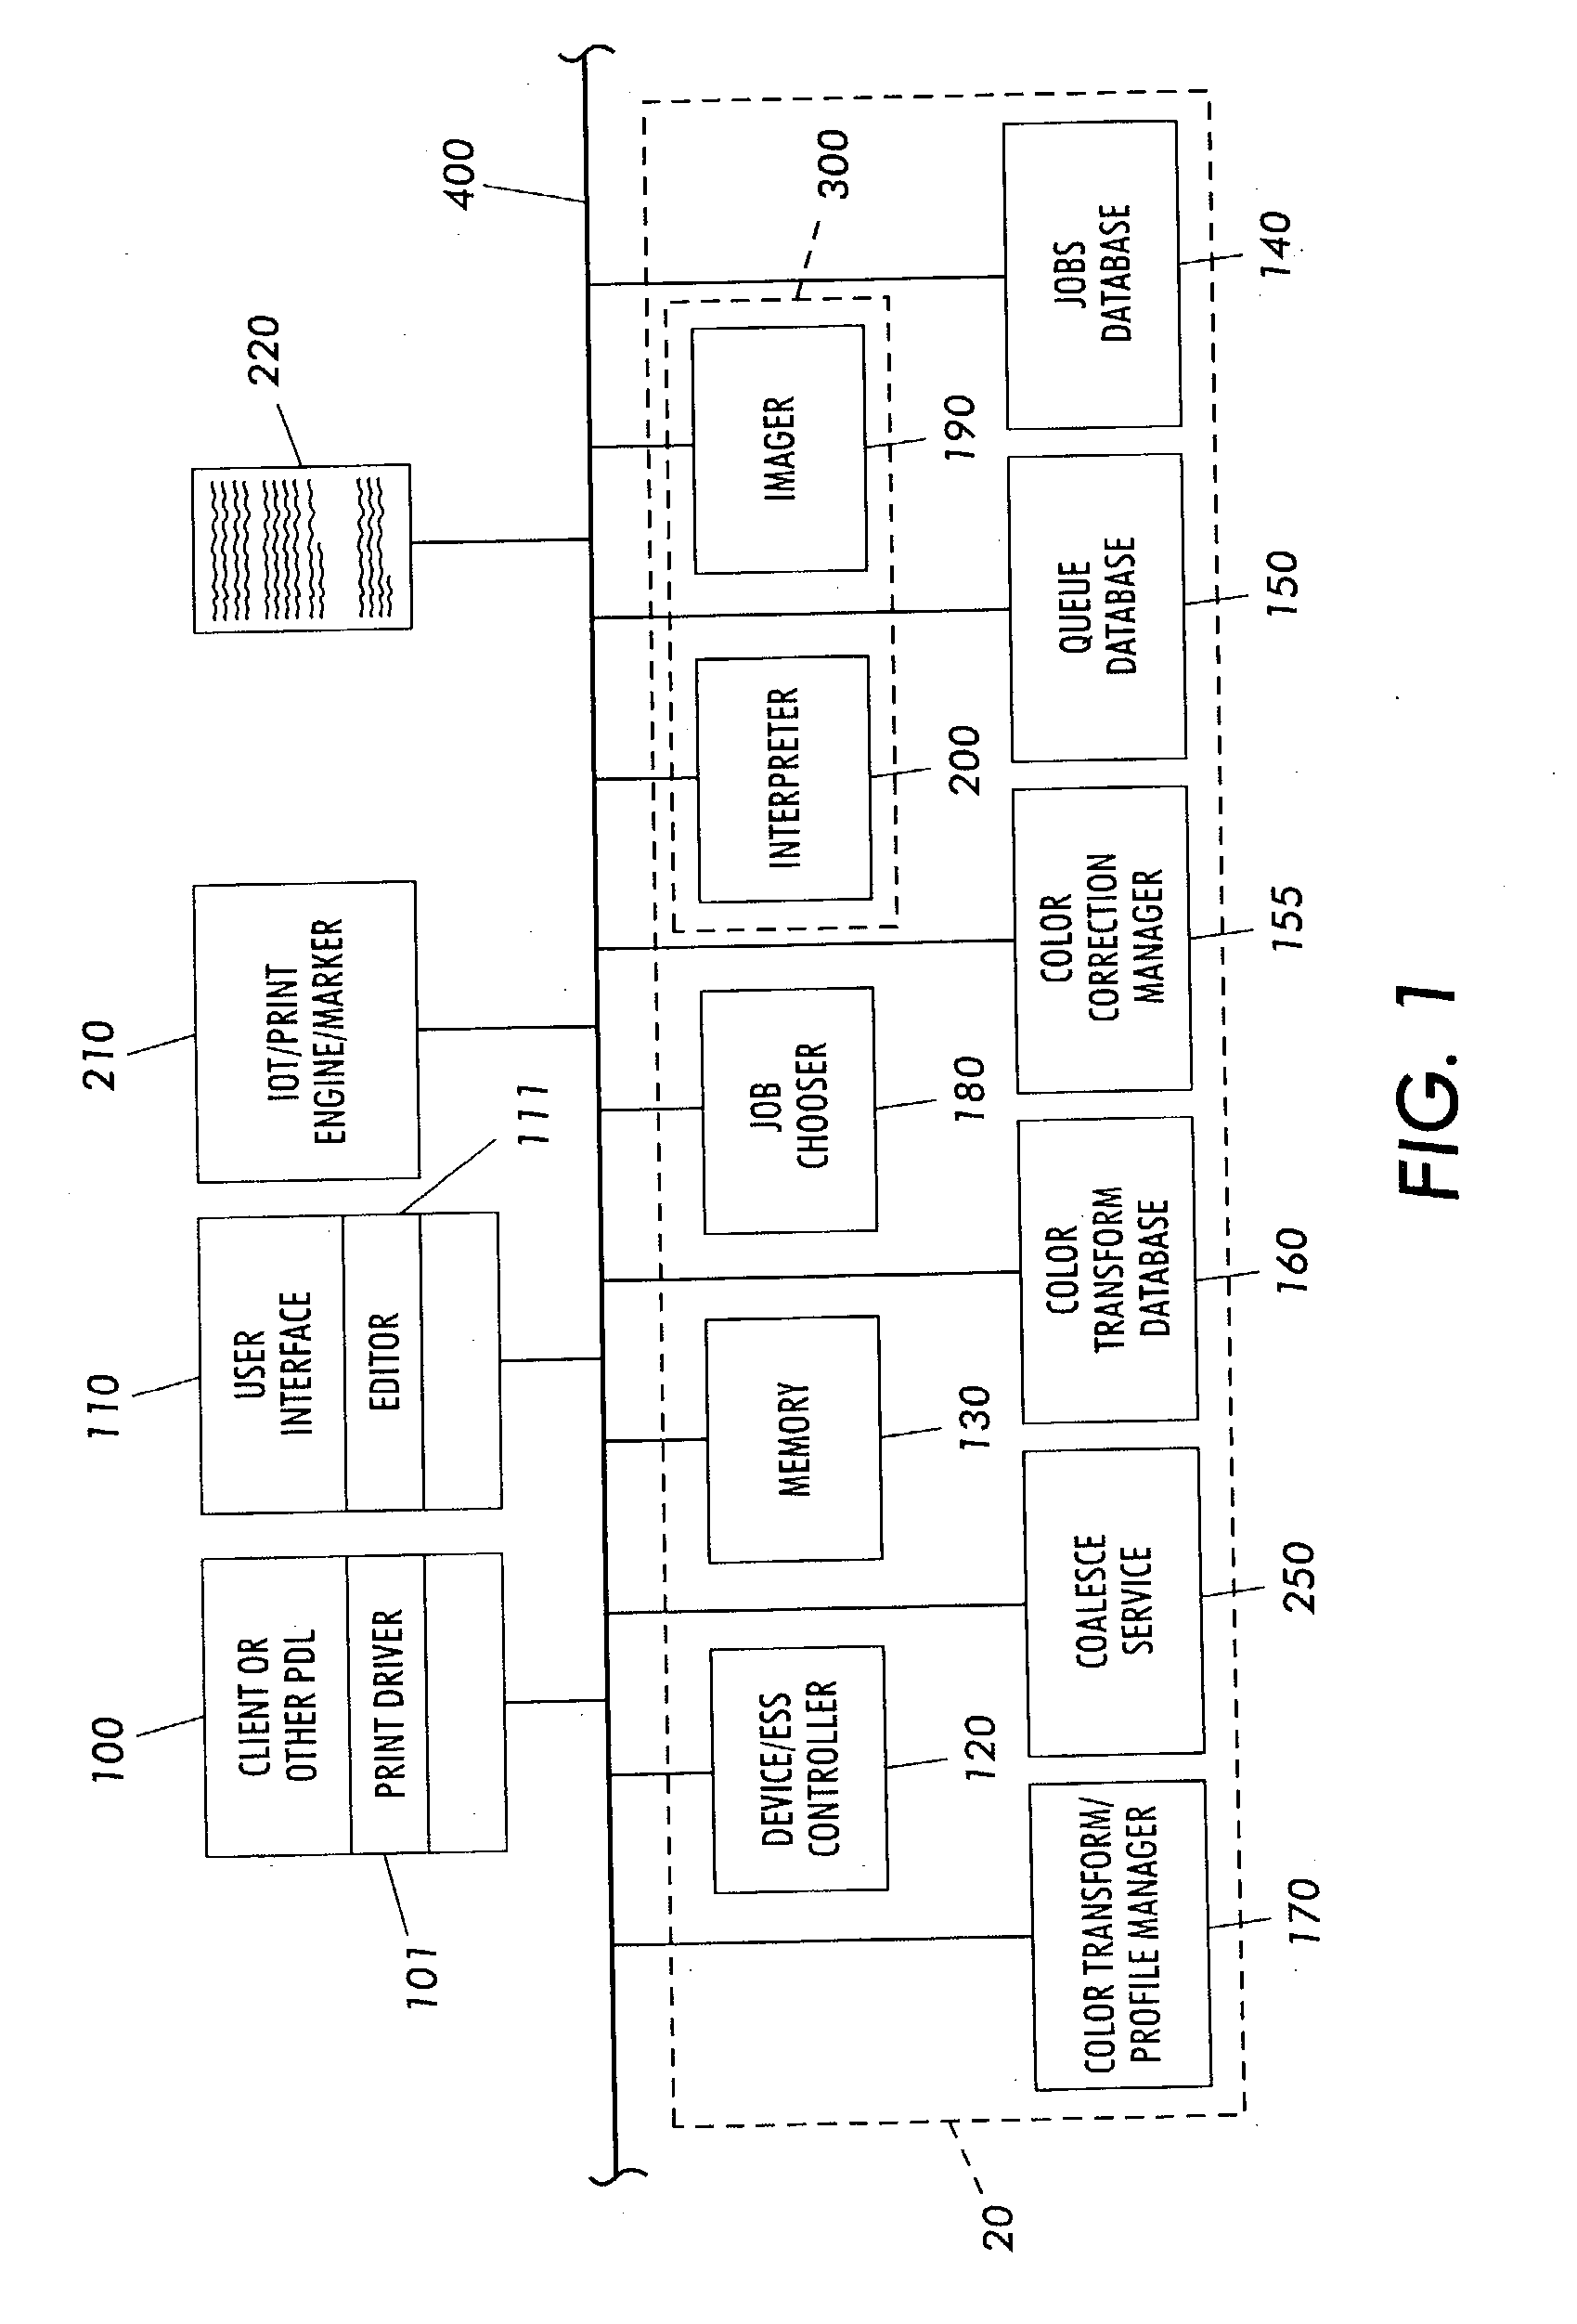 Systems and methods for generating source color space interpretations